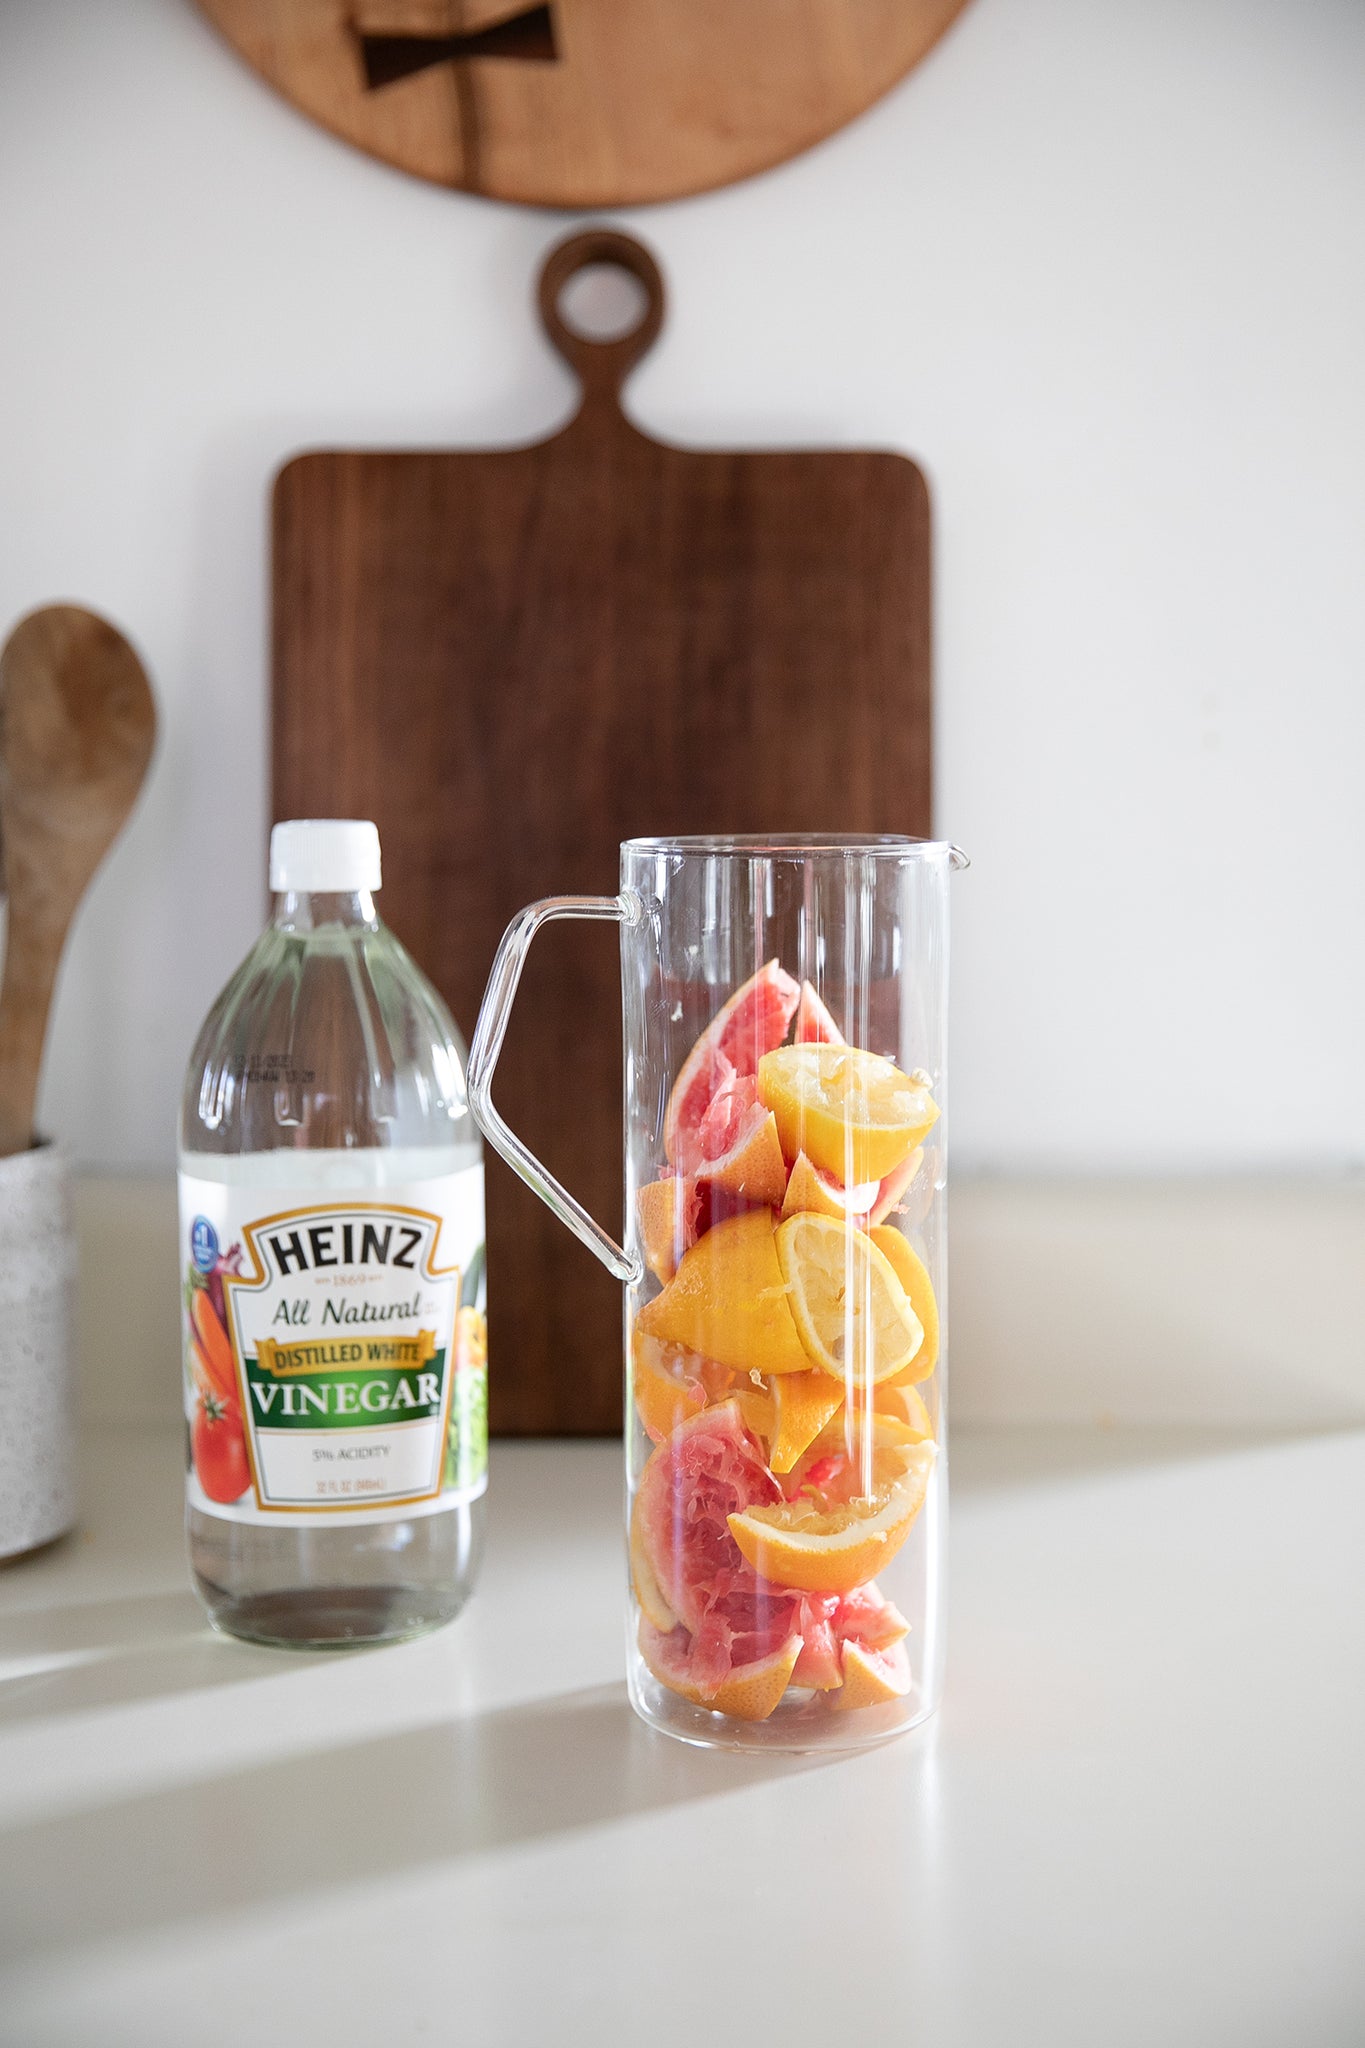 glass bottle or vinegar and a glass with citrus slices in it